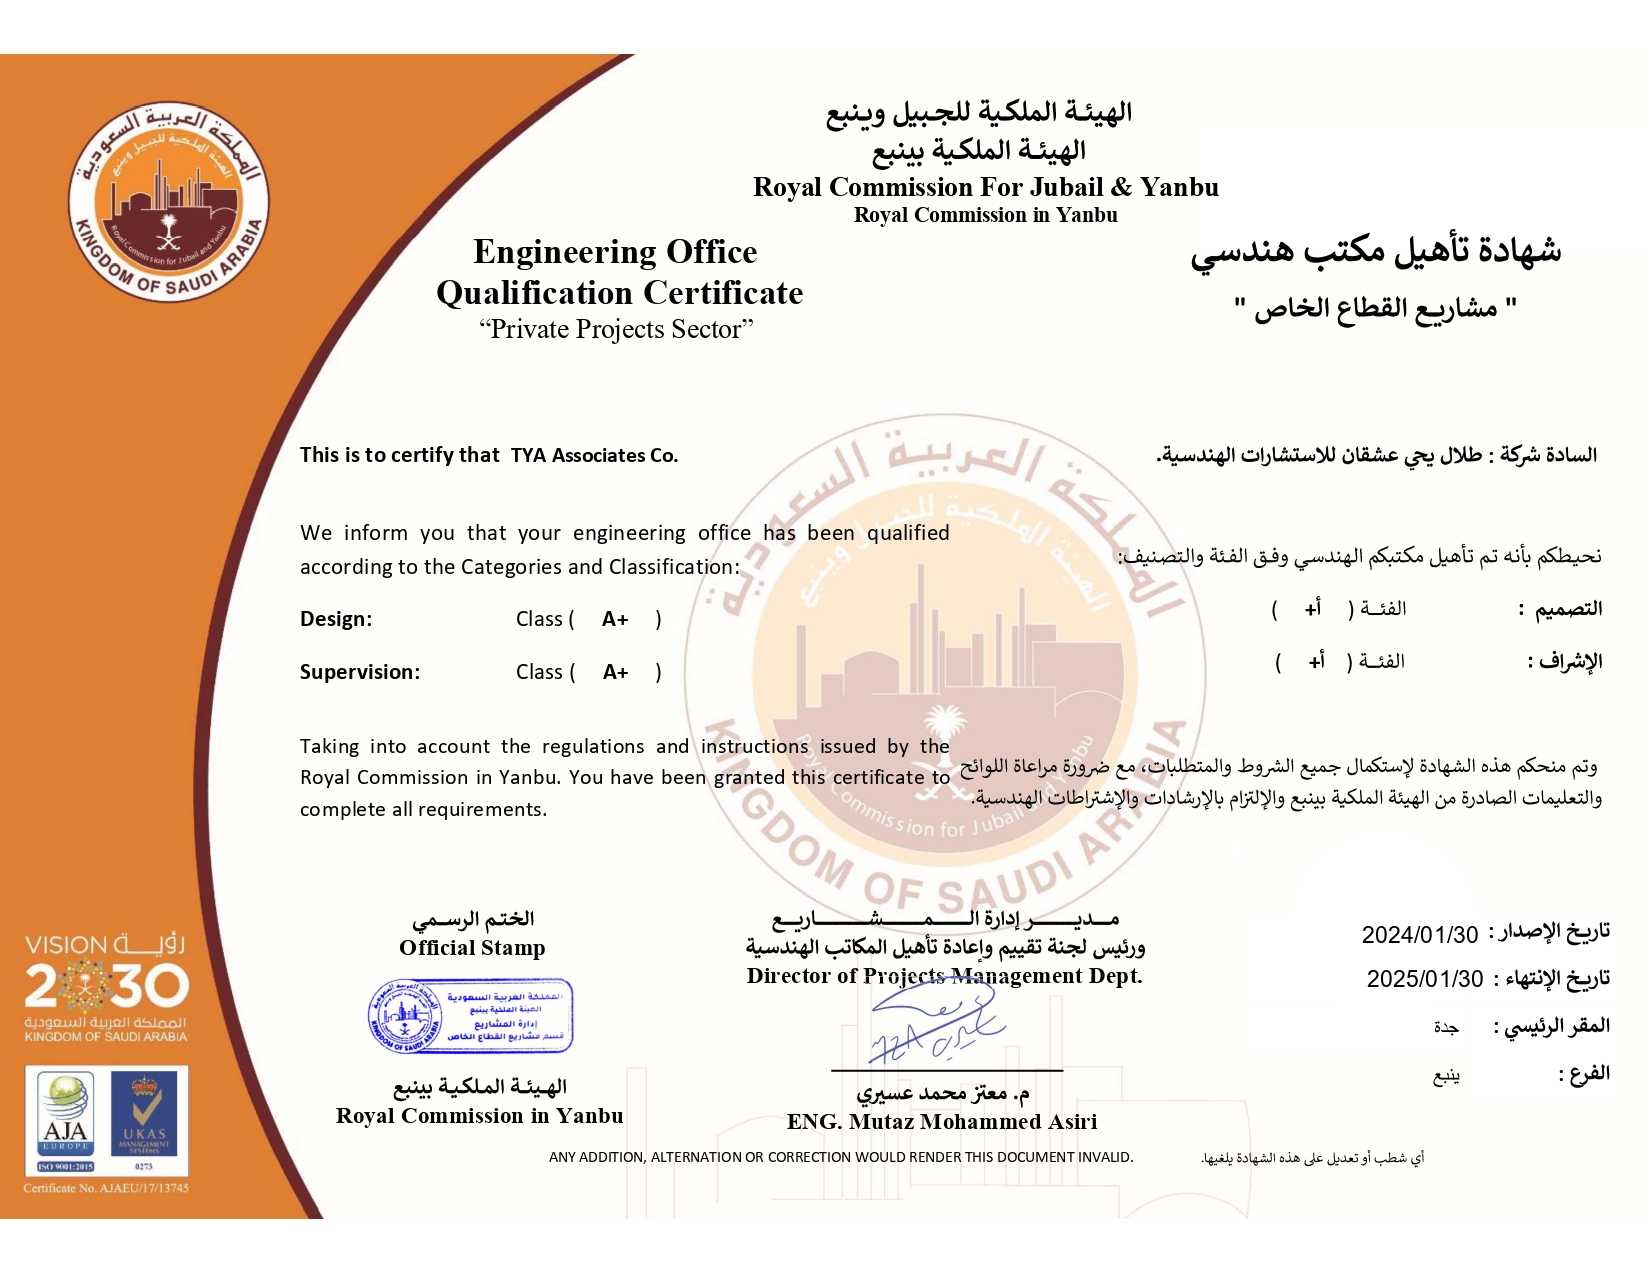 AN ENGINEERING OFFICE QUALIFICATION CERTIFICATE FROM THE ROYAL COMMISSION FOR JUBAIL AND YANBU